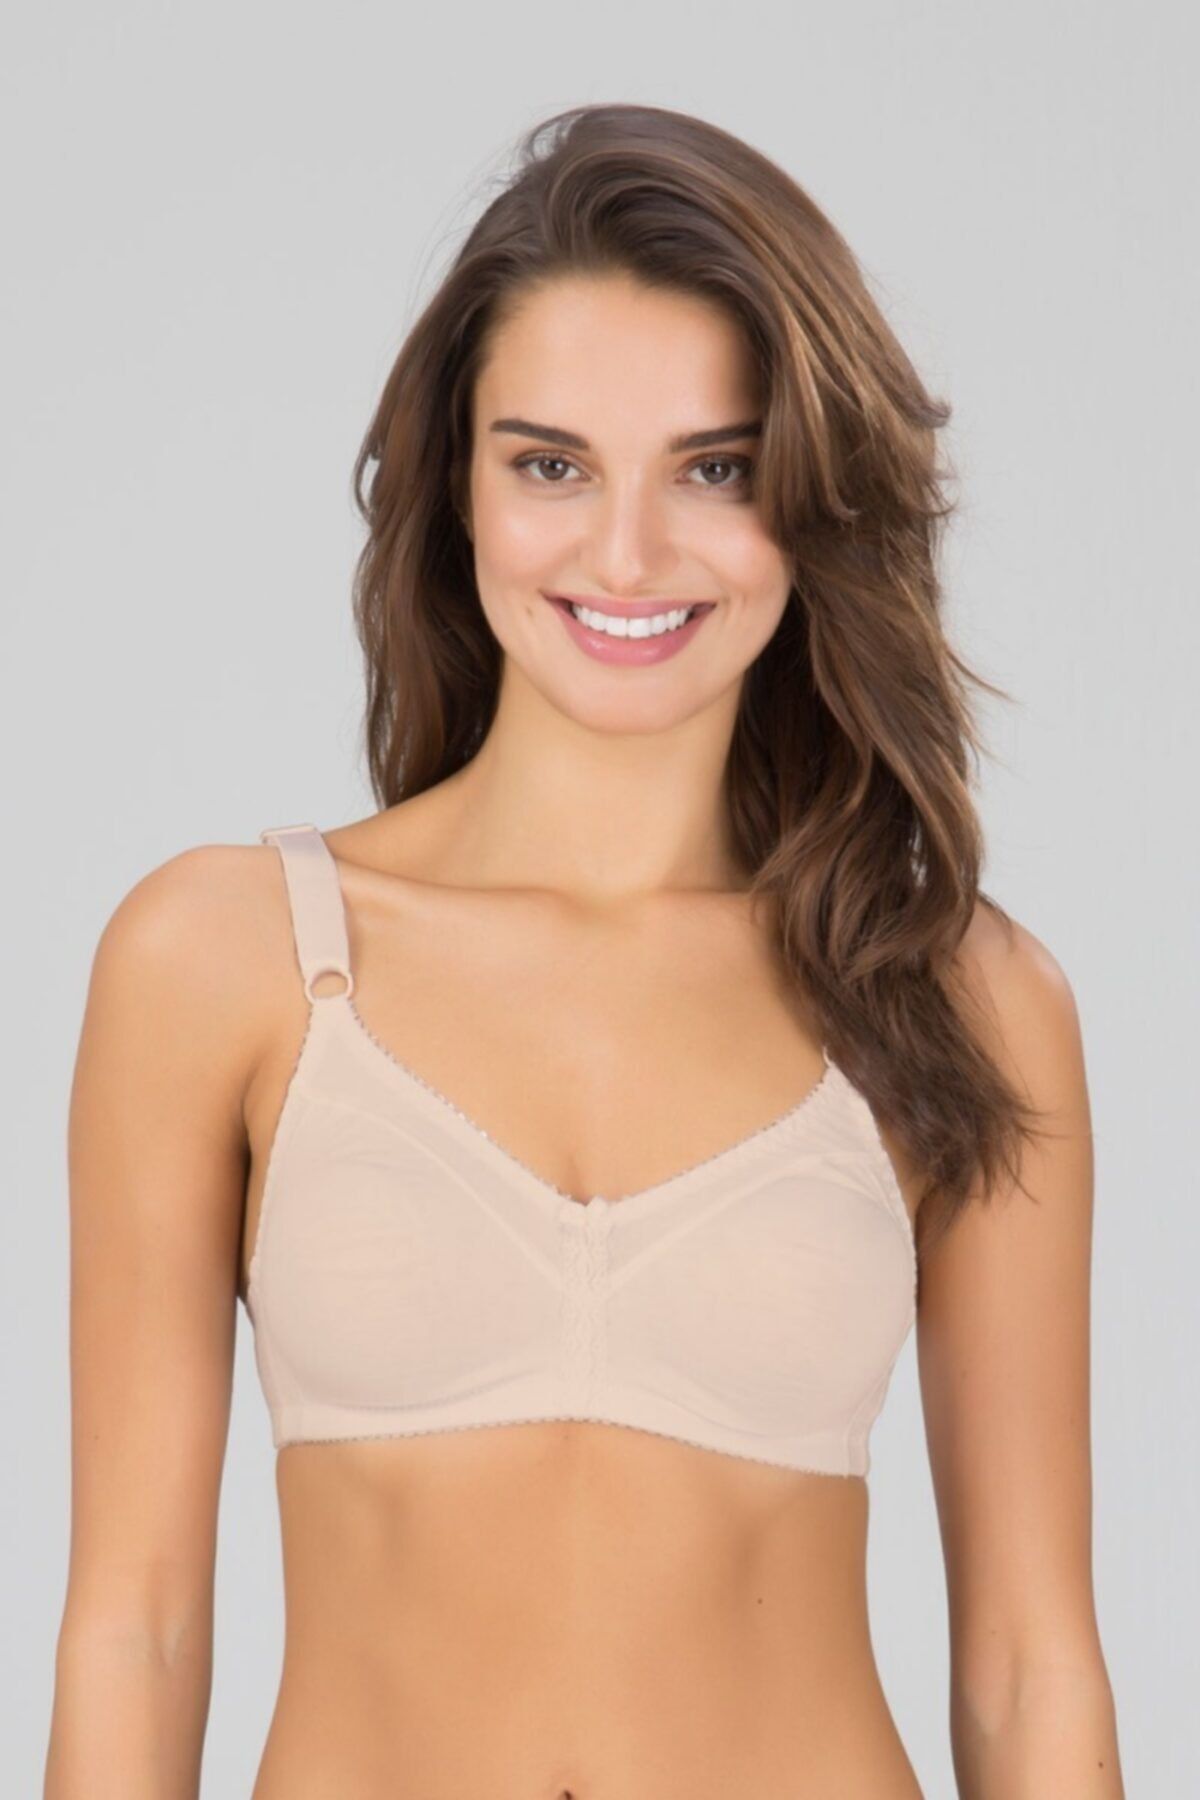 Non-Padded Supportive Bra